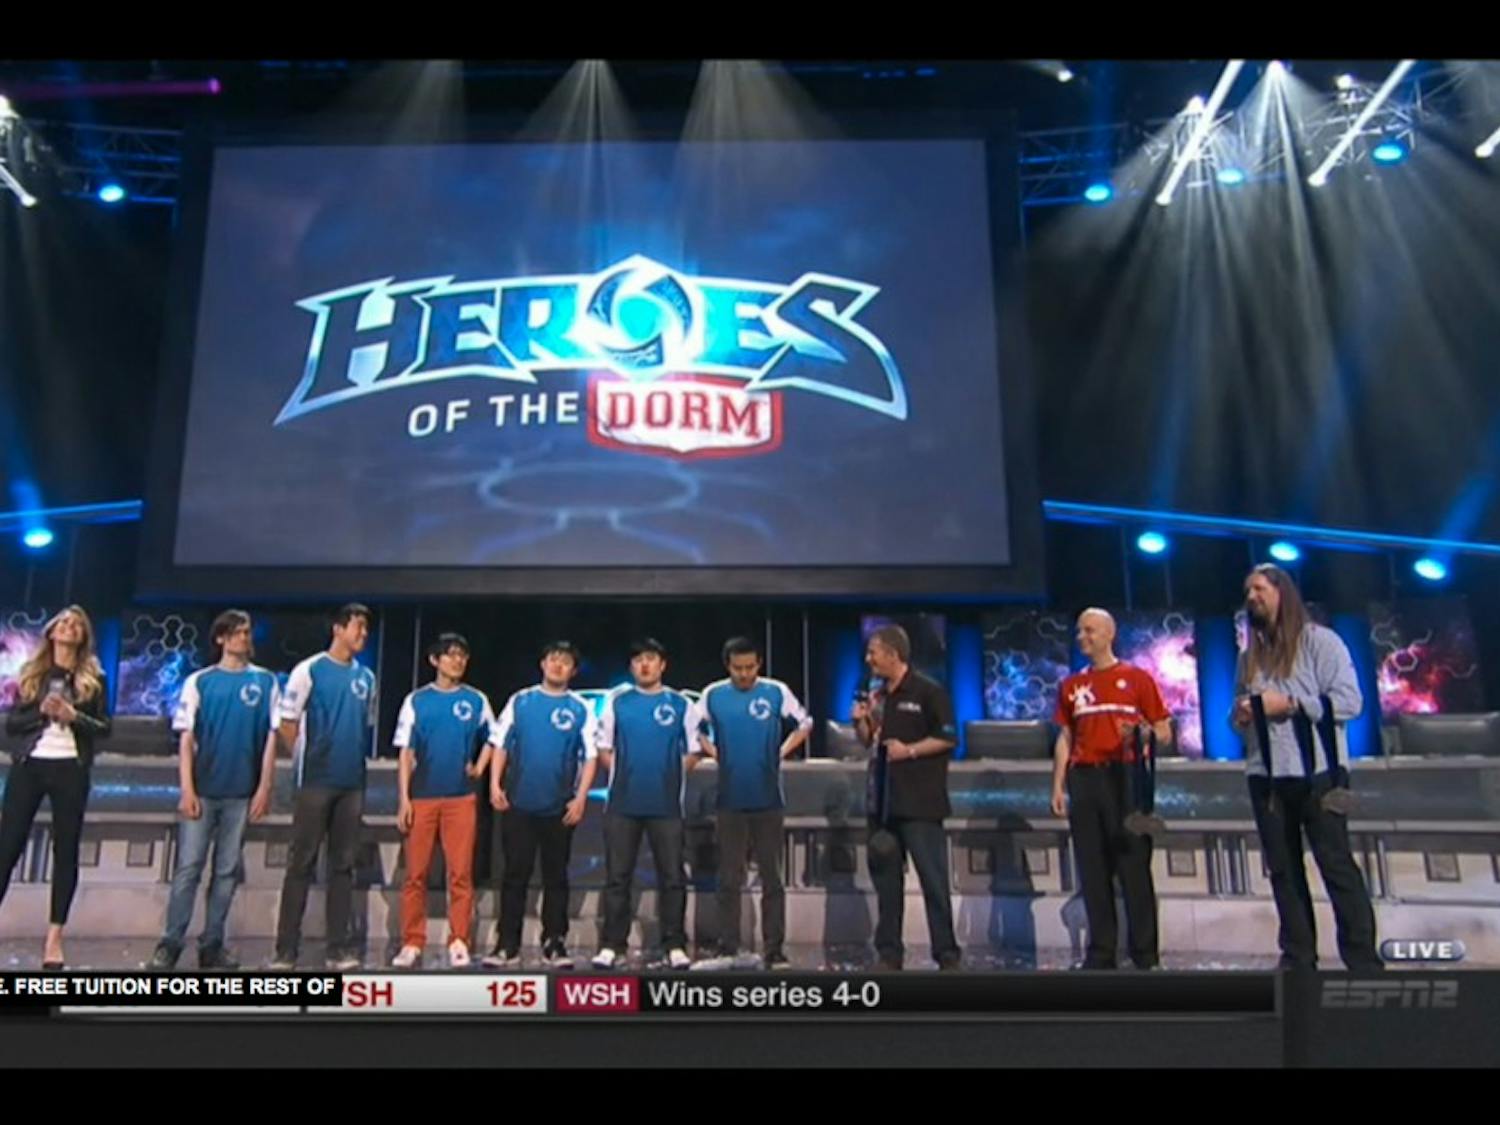 Members of UC Berkeley's eSports team take the stage after defeating ASU in the Heroes of the Dorm championship match on Sunday, April 26, 2015 in Los Angeles. The Golden Bears topped ASU's Dream Team 3-2 to win the first eSports event broadcast live on American TV.